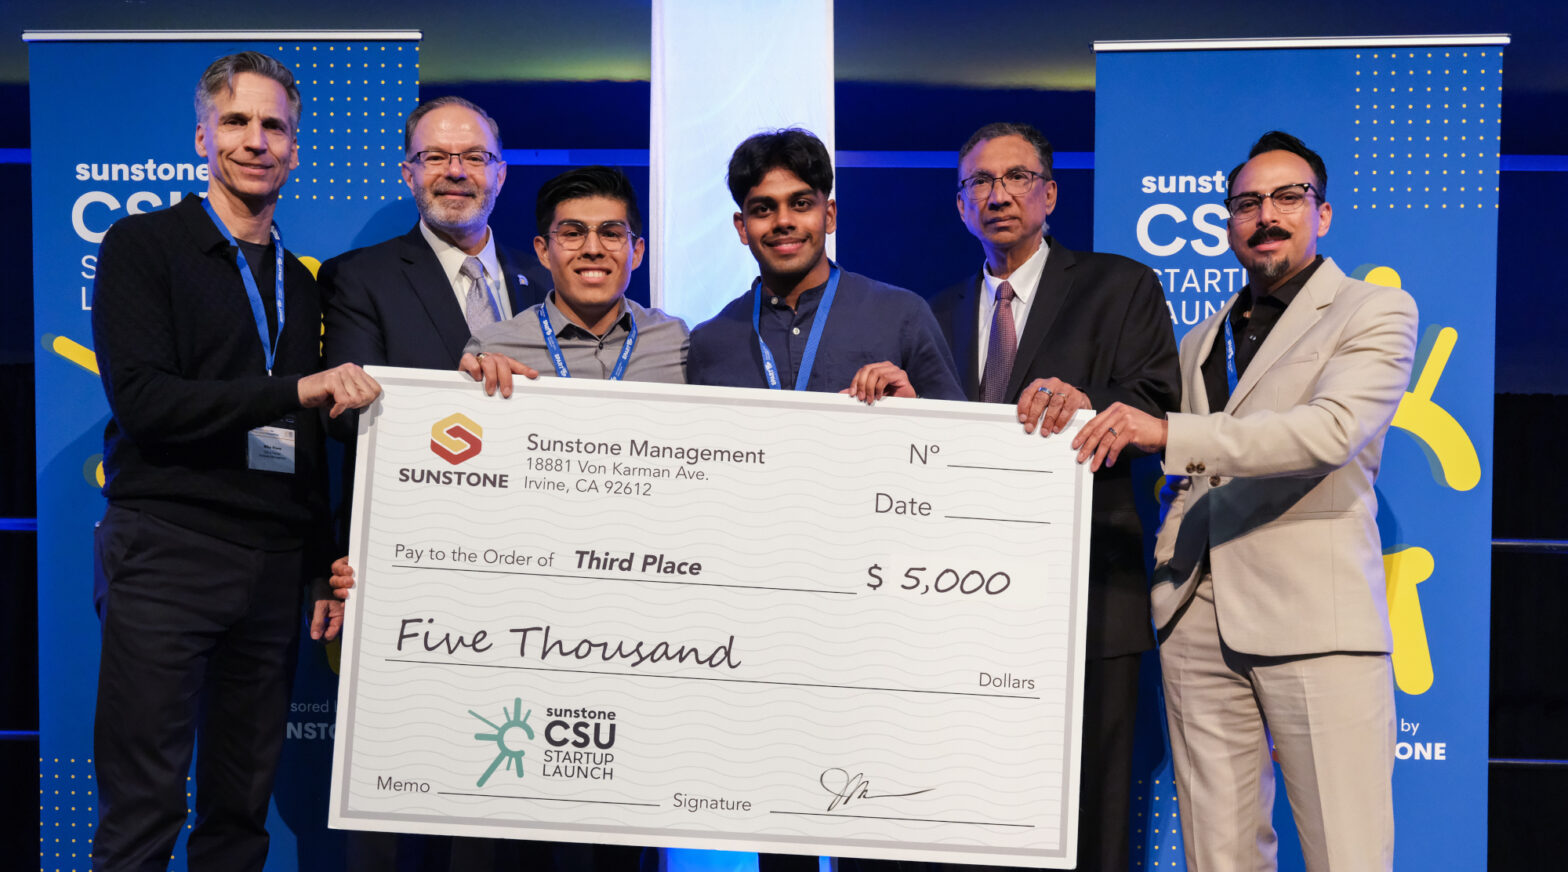 CSUF Students Make Social Impact in State Entrepreneurship Competition